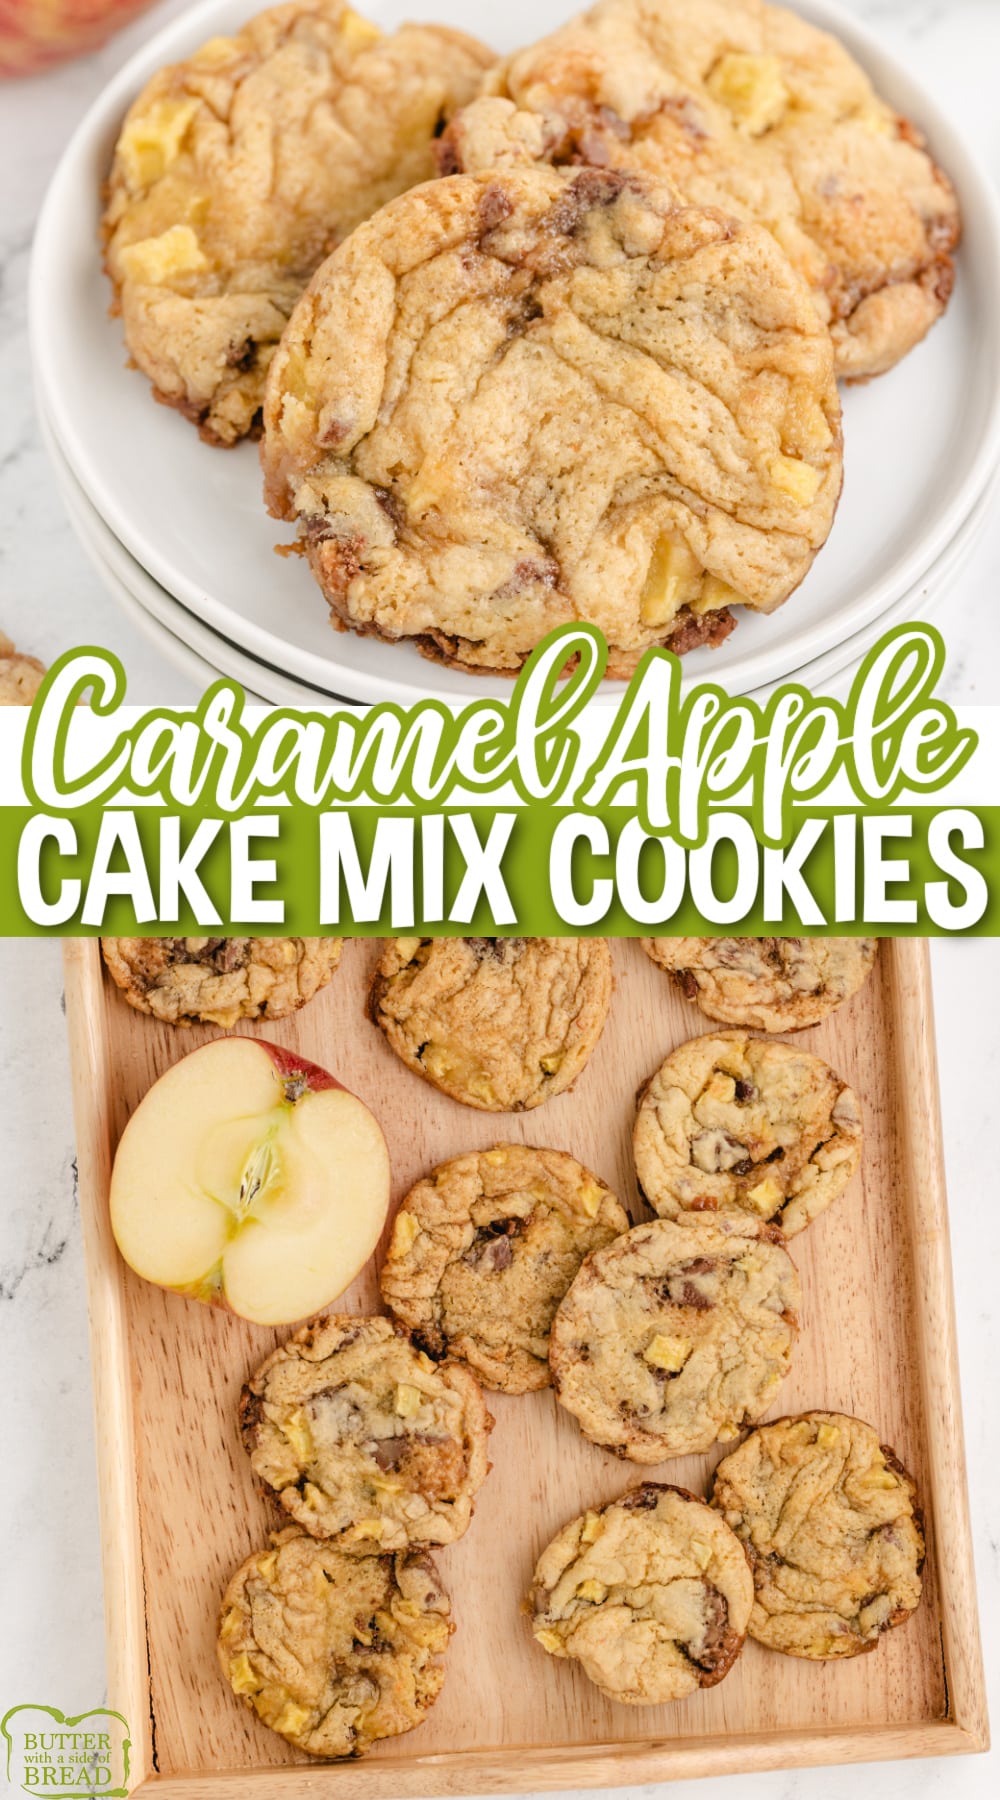 Caramel Apple Cake Mix Cookies are made with fresh apples, Rolo candies and a cake mix. Easy cake mix cookie recipe that is perfect for fall!